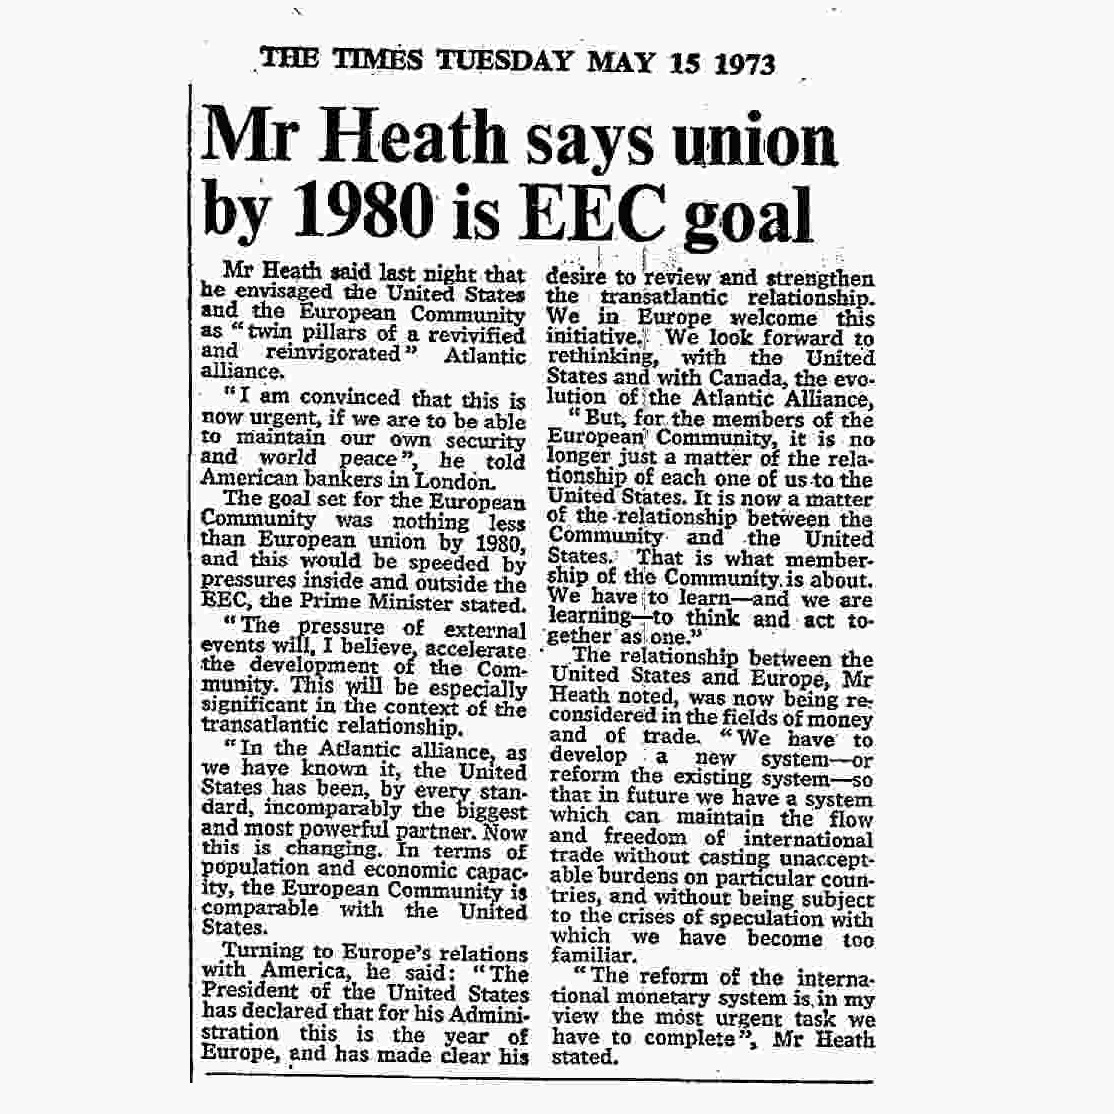 May 15th, 1973: The goal set for the European Community was nothing less than European union by 1980, and this would be speeded by pressures inside and outside the EEC, the Prime Minister stated.